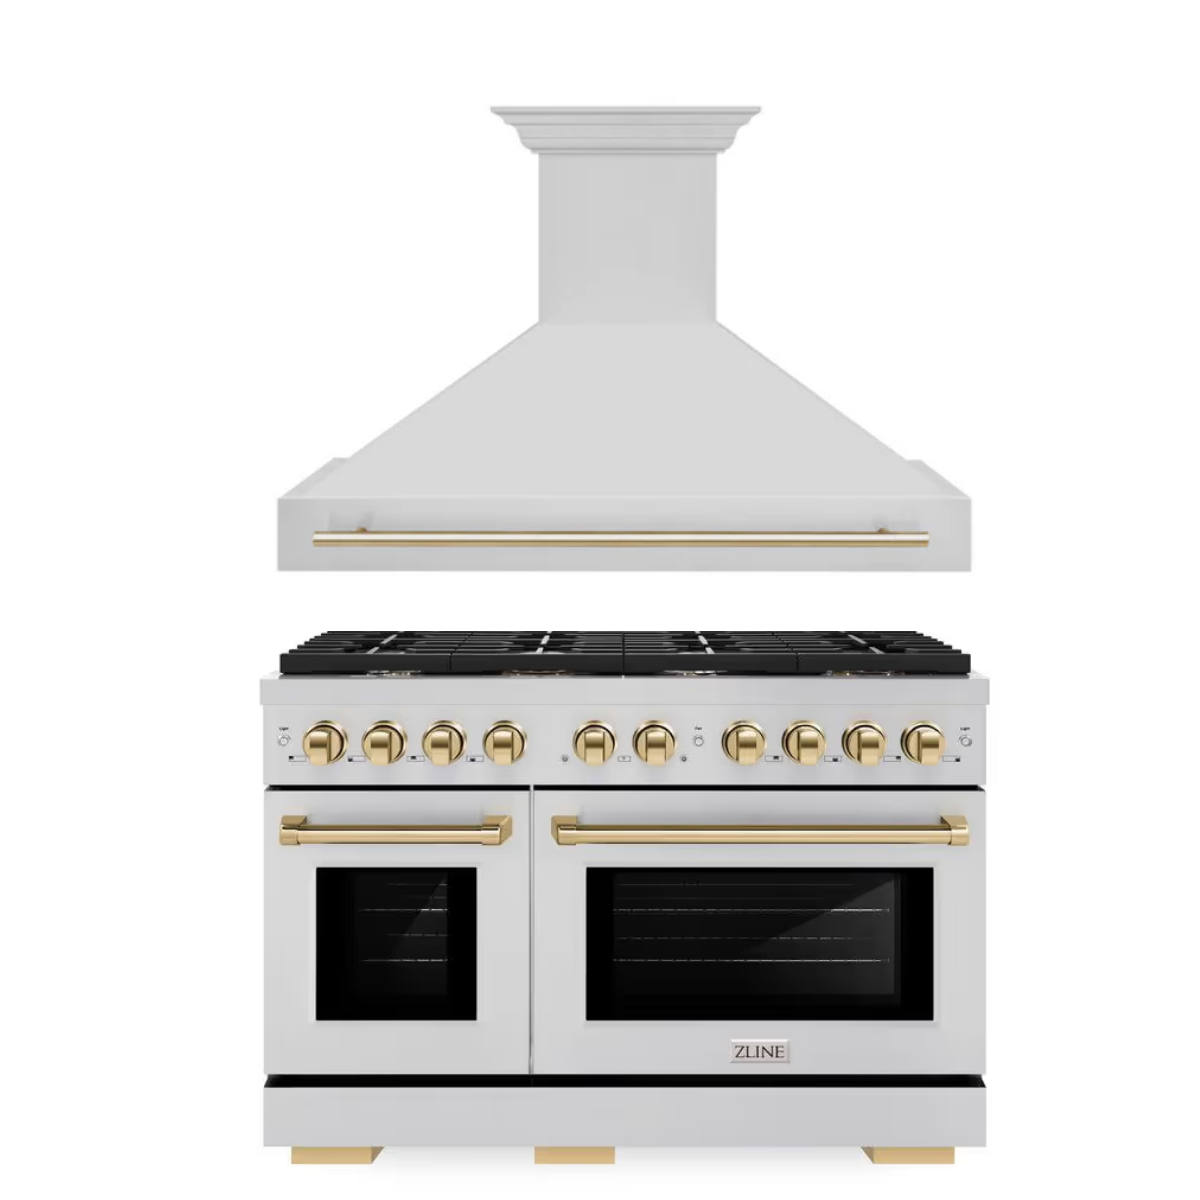 ZLINE Autograph Package - 48 In. Gas Range and Range Hood in Stainless Steel with Gold Accents, 2AKPR-RGRH48-G